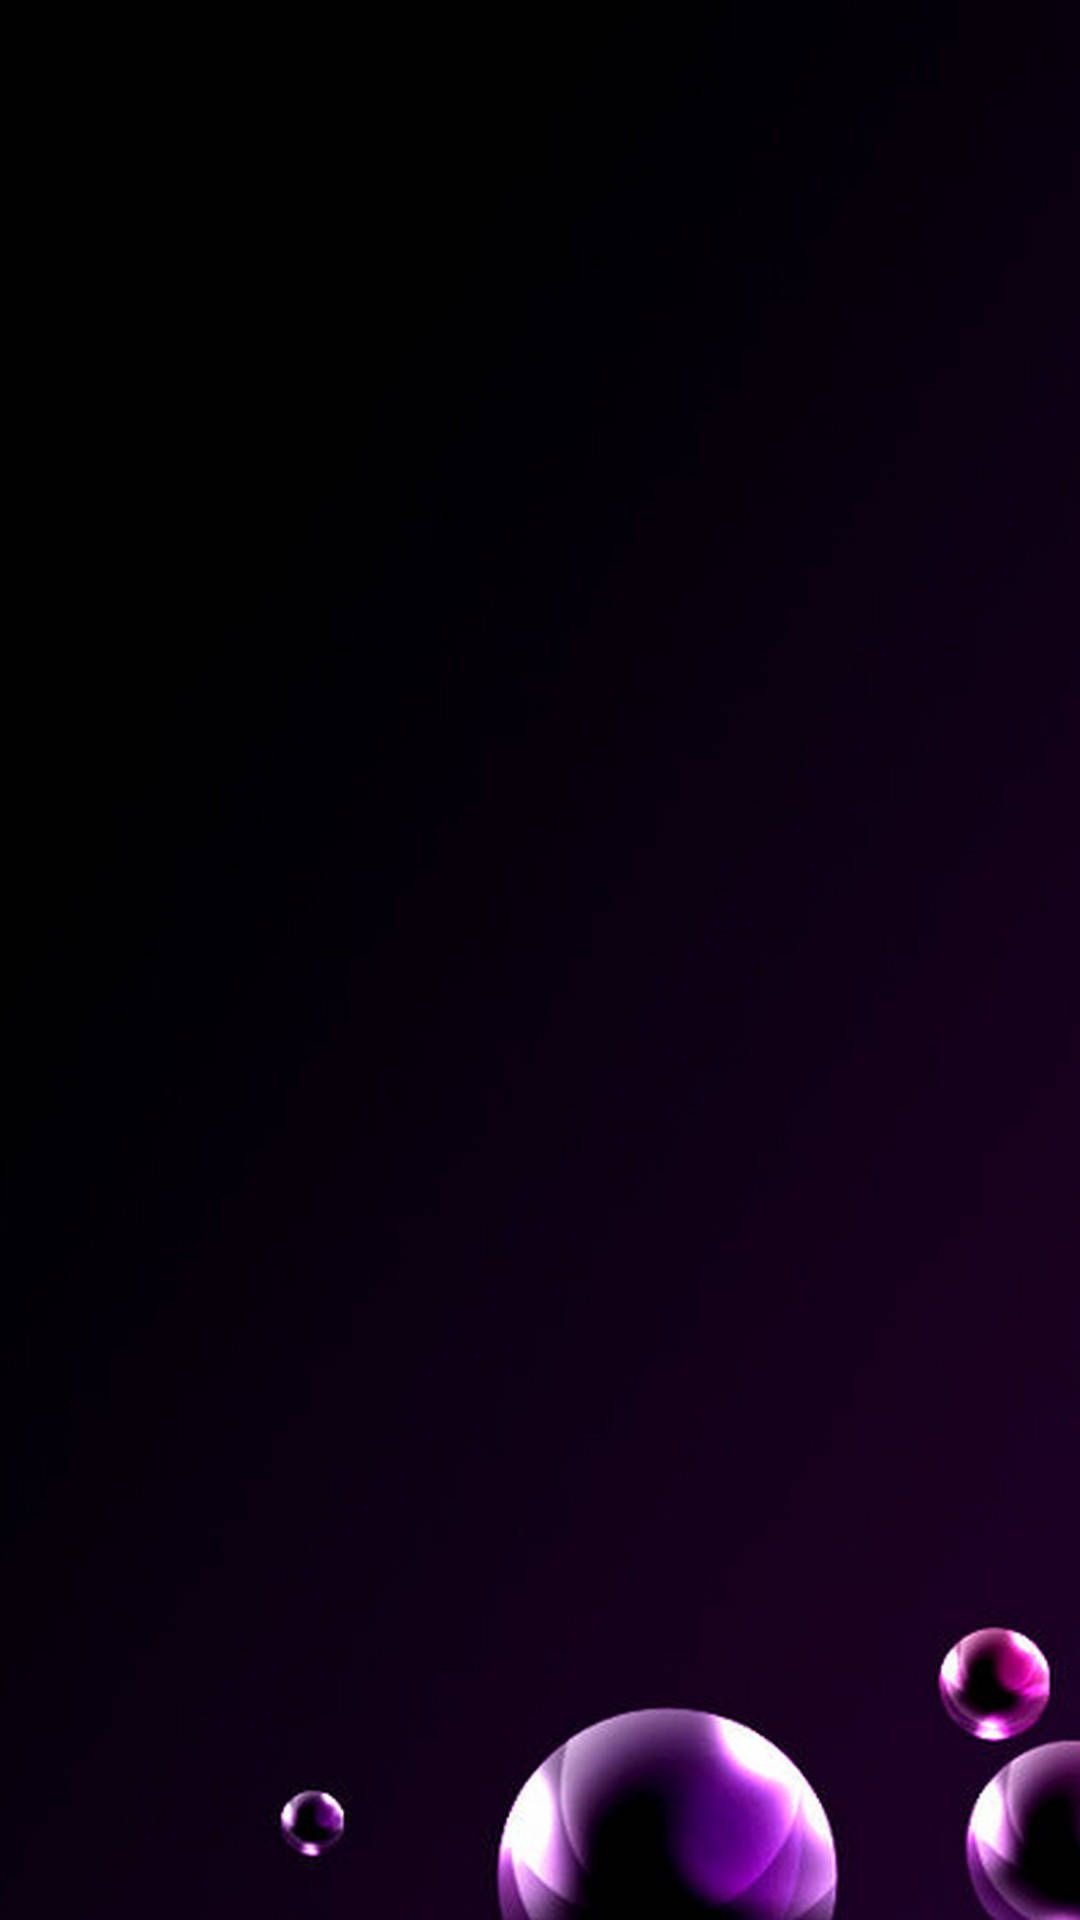 Dark Purple iPhone Wallpaper with high-resolution 1080x1920 pixel. You can use this wallpaper for your iPhone 5, 6, 7, 8, X, XS, XR backgrounds, Mobile Screensaver, or iPad Lock Screen - Bubbles